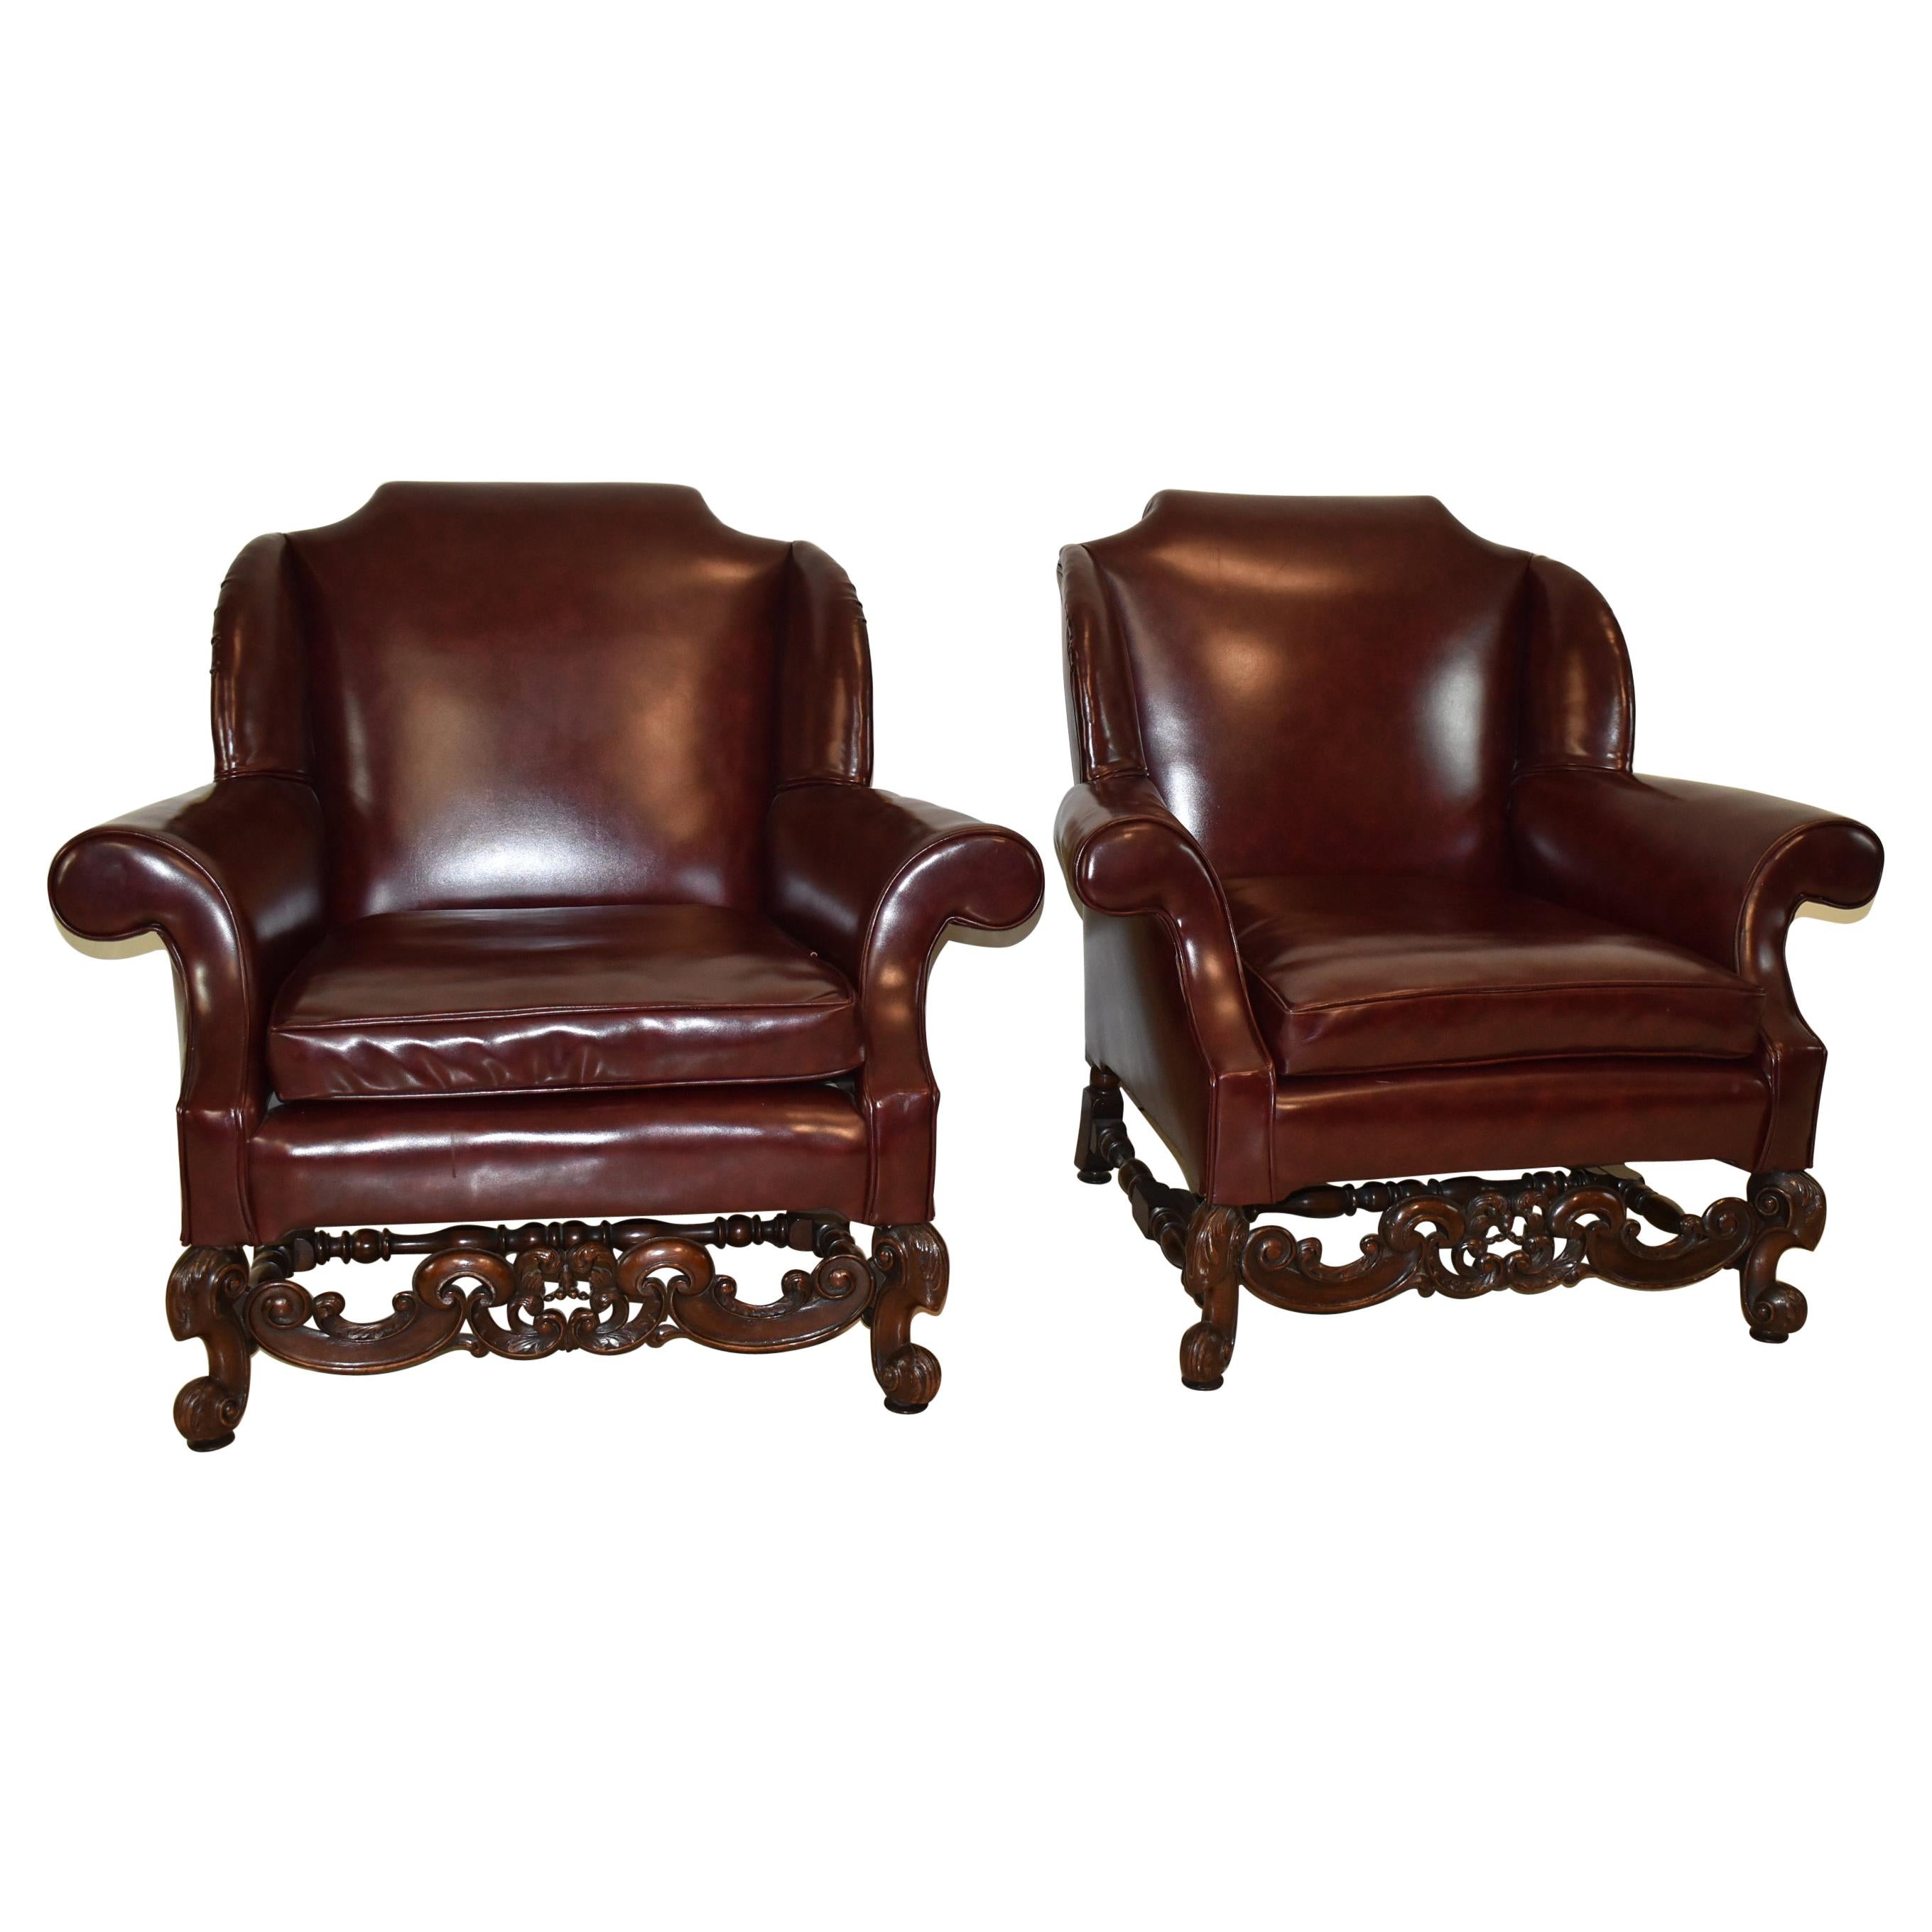 Pair Burgundy Wing Back Club Chairs Heavily Carved Walnut Frame